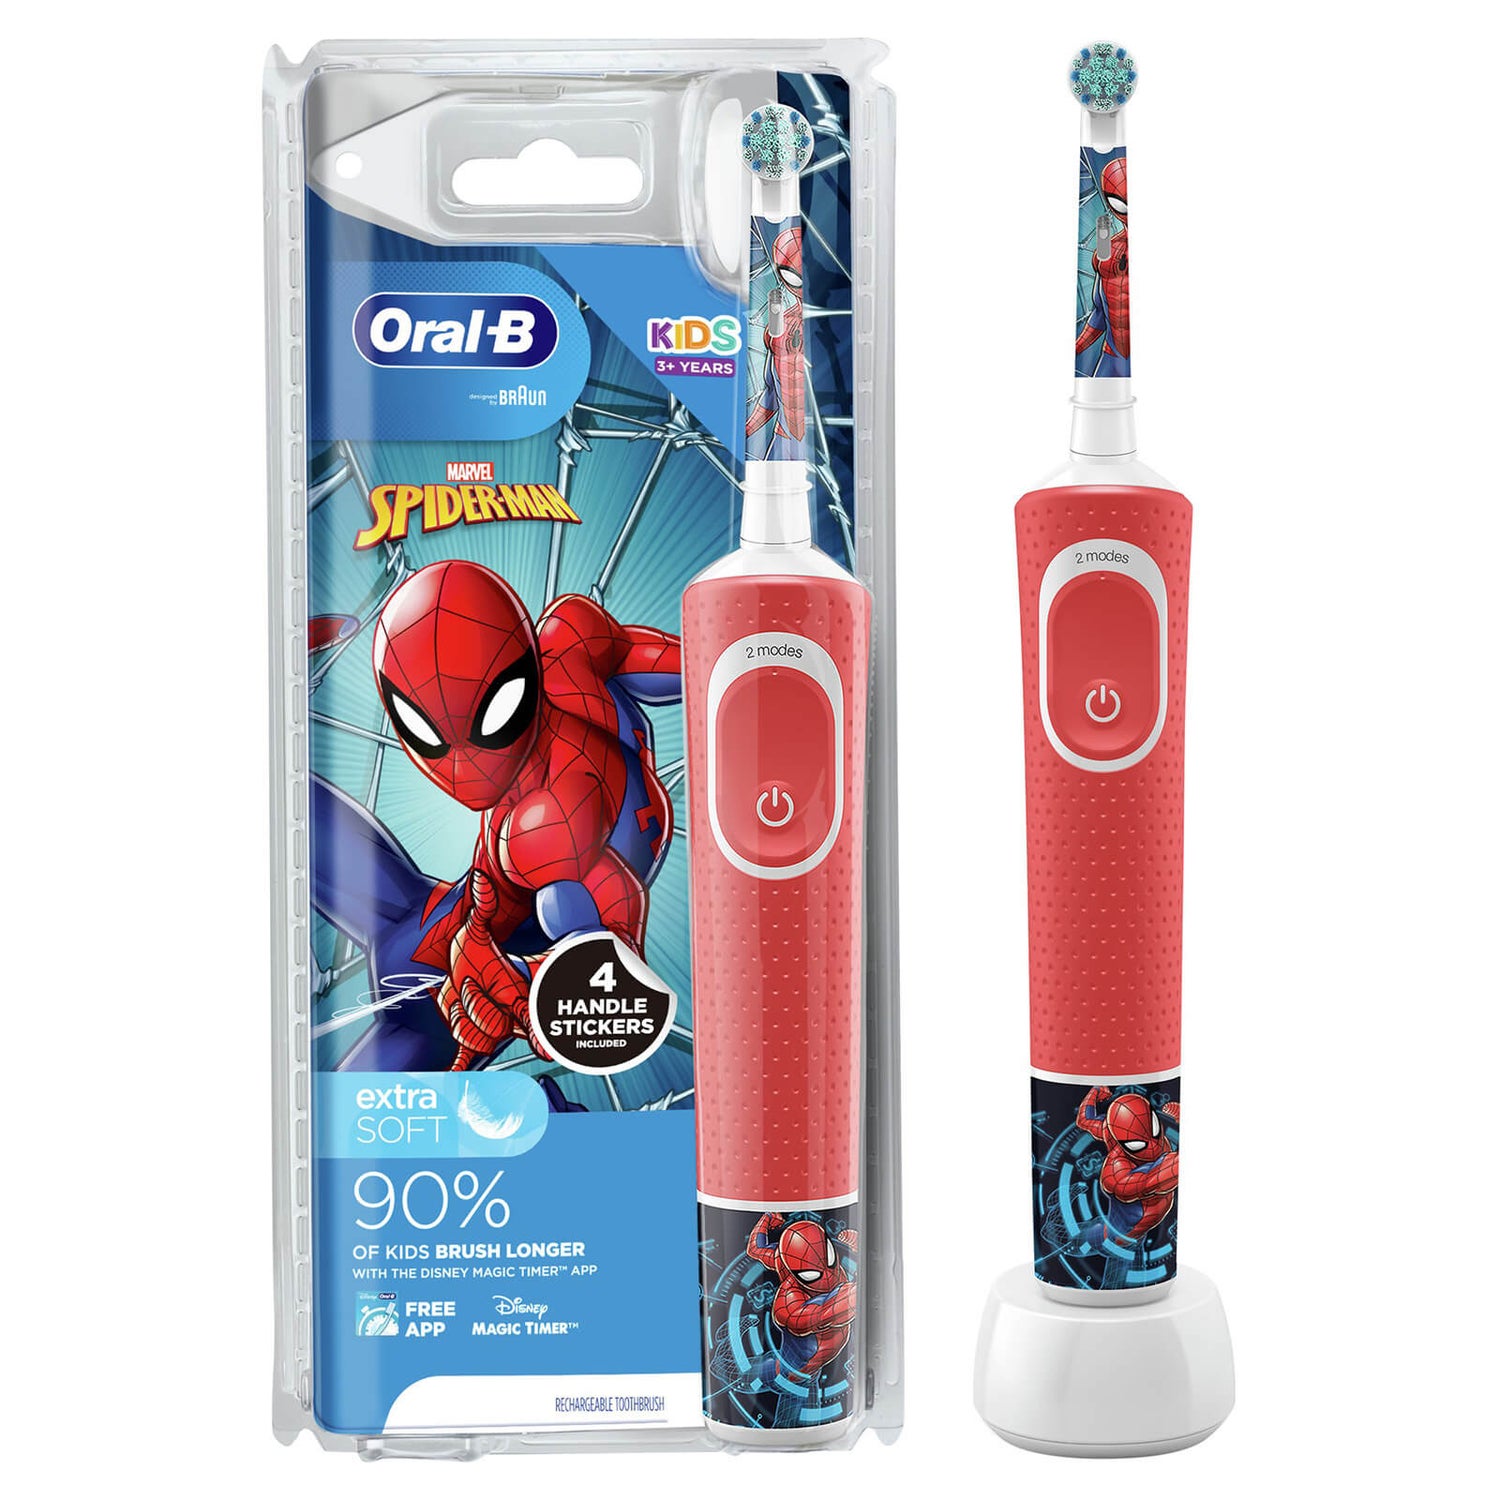 Kids Spiderman Electric Toothbrush for Ages 3+